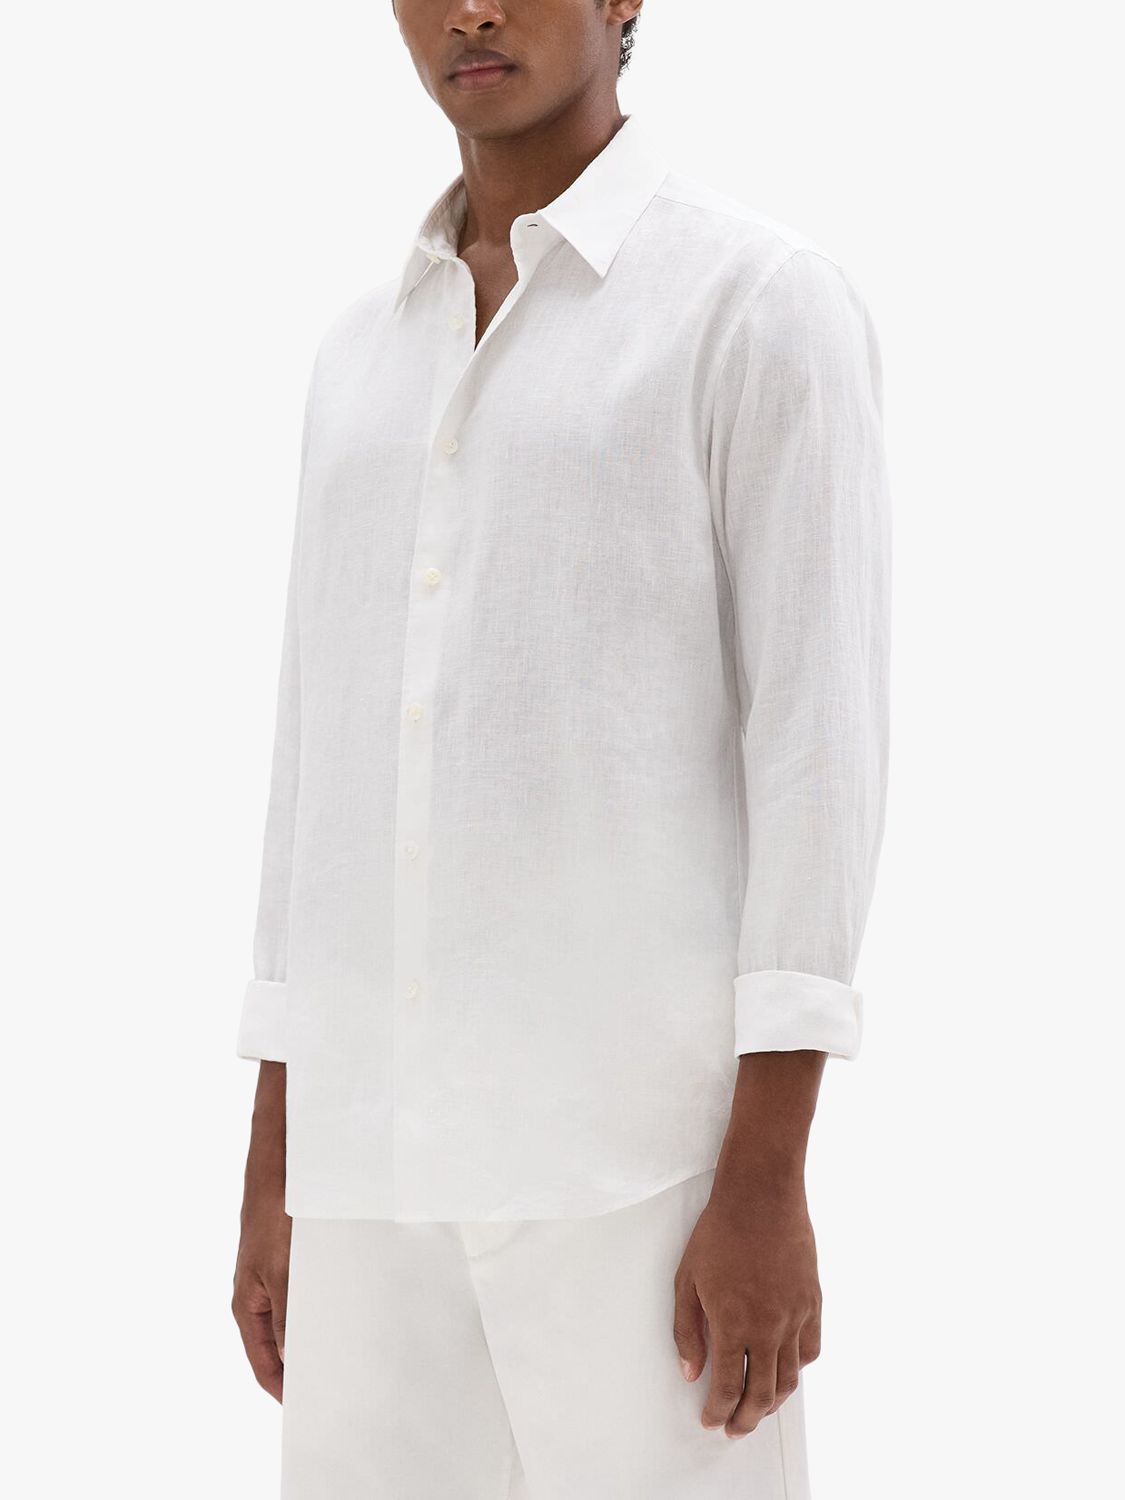 Theory Relaxed Linen Shirt, White, S